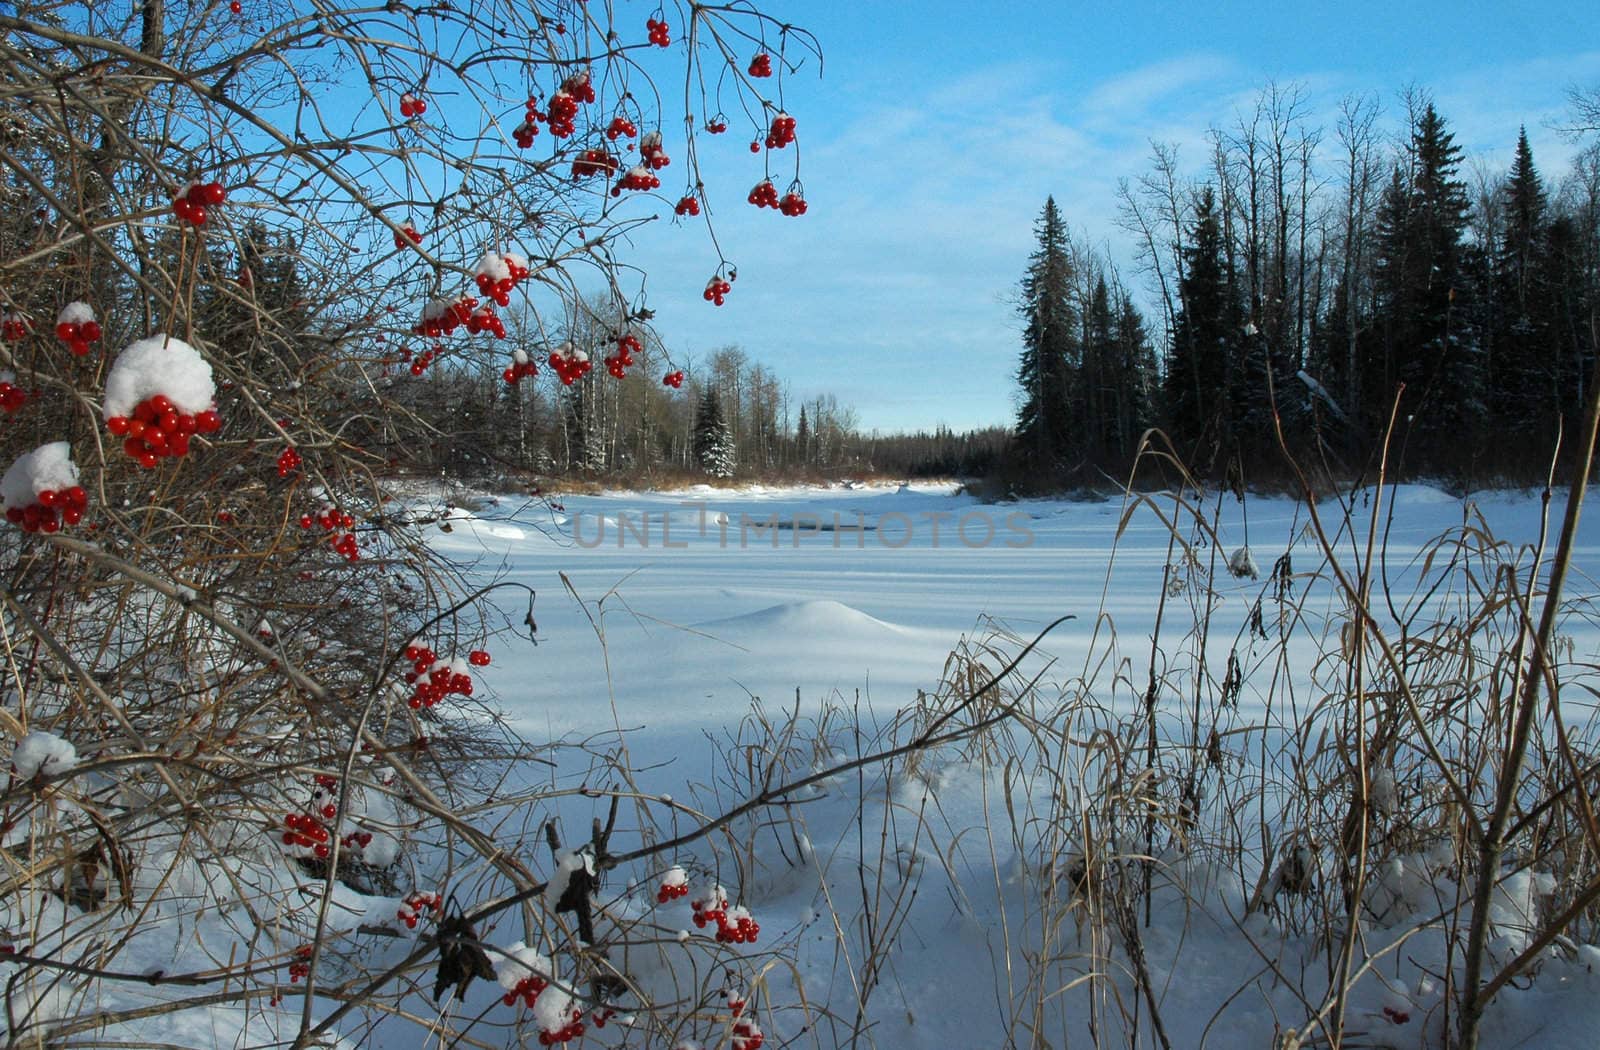 Colorful berries hanging over frozen river